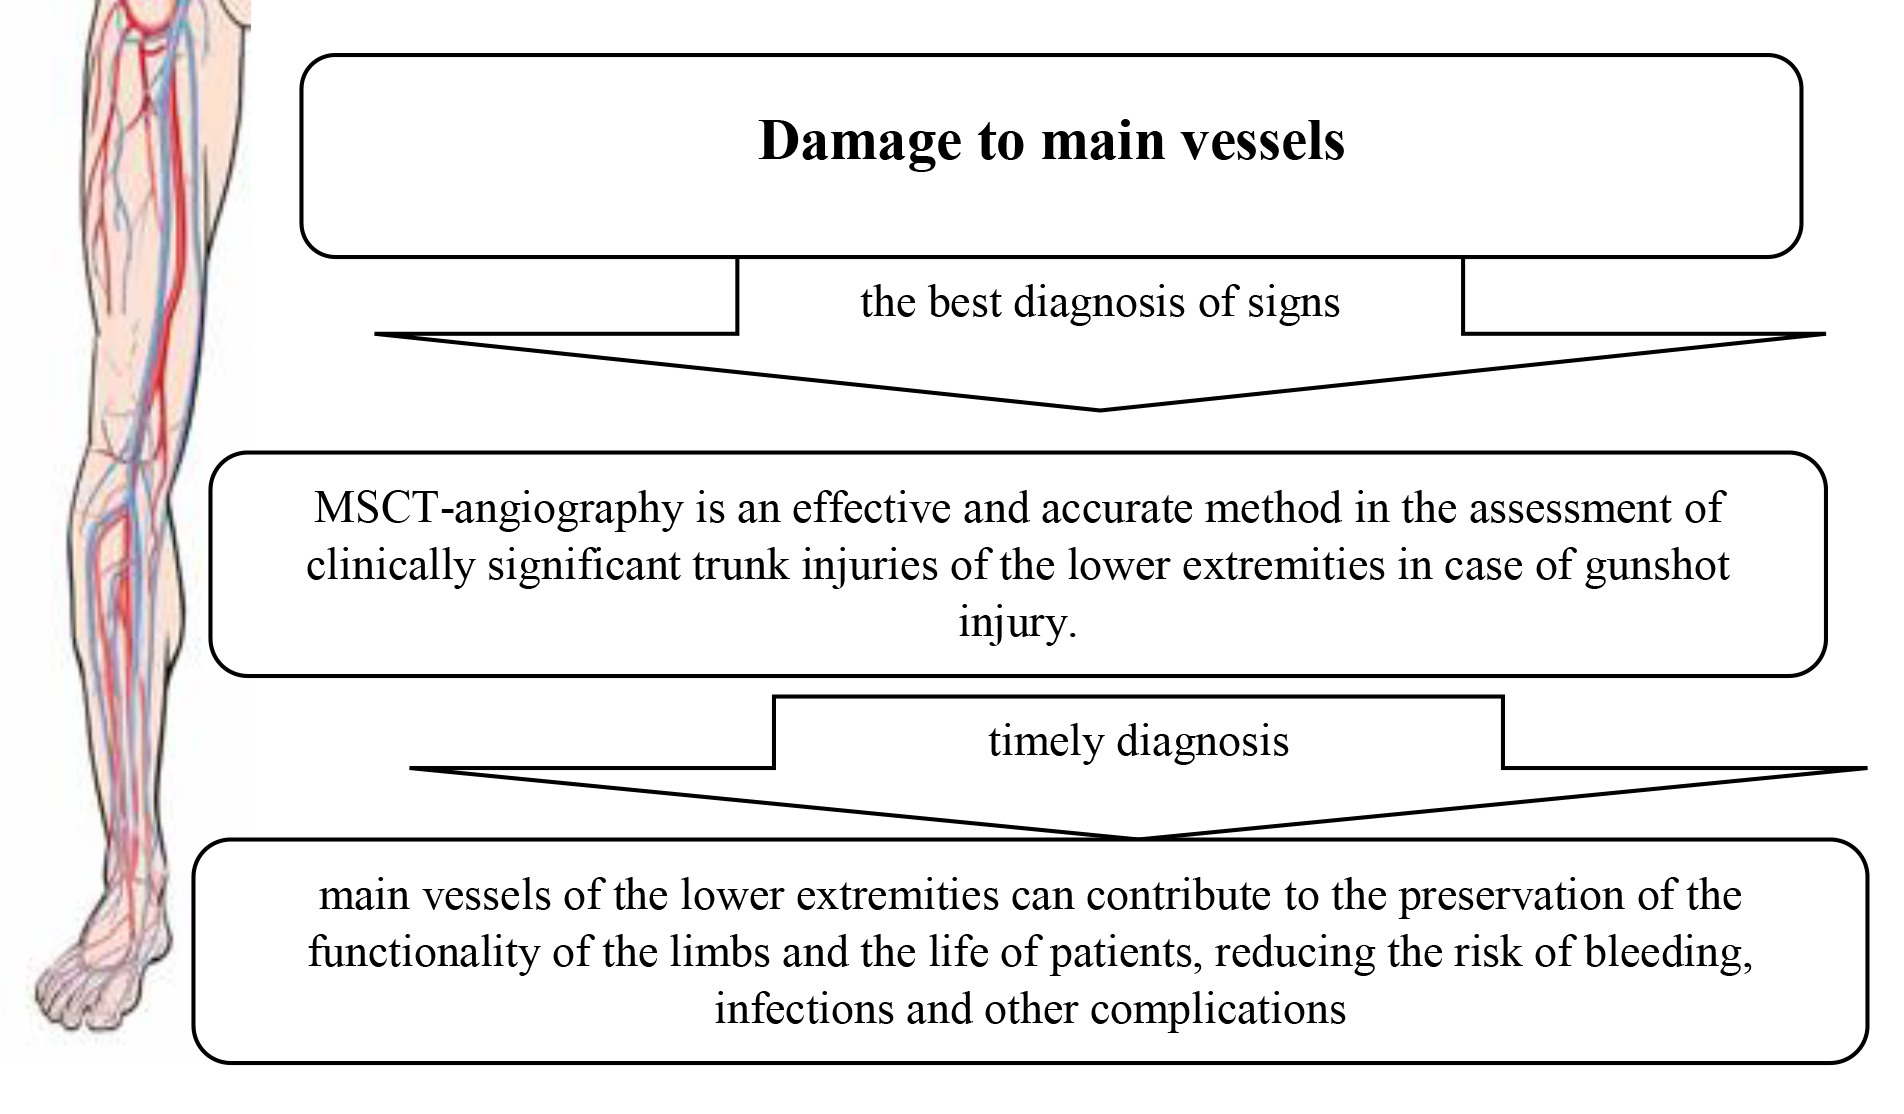 X-ray diagnostics of gunshot wounds of main vessels of the limbs: theoretical analysis